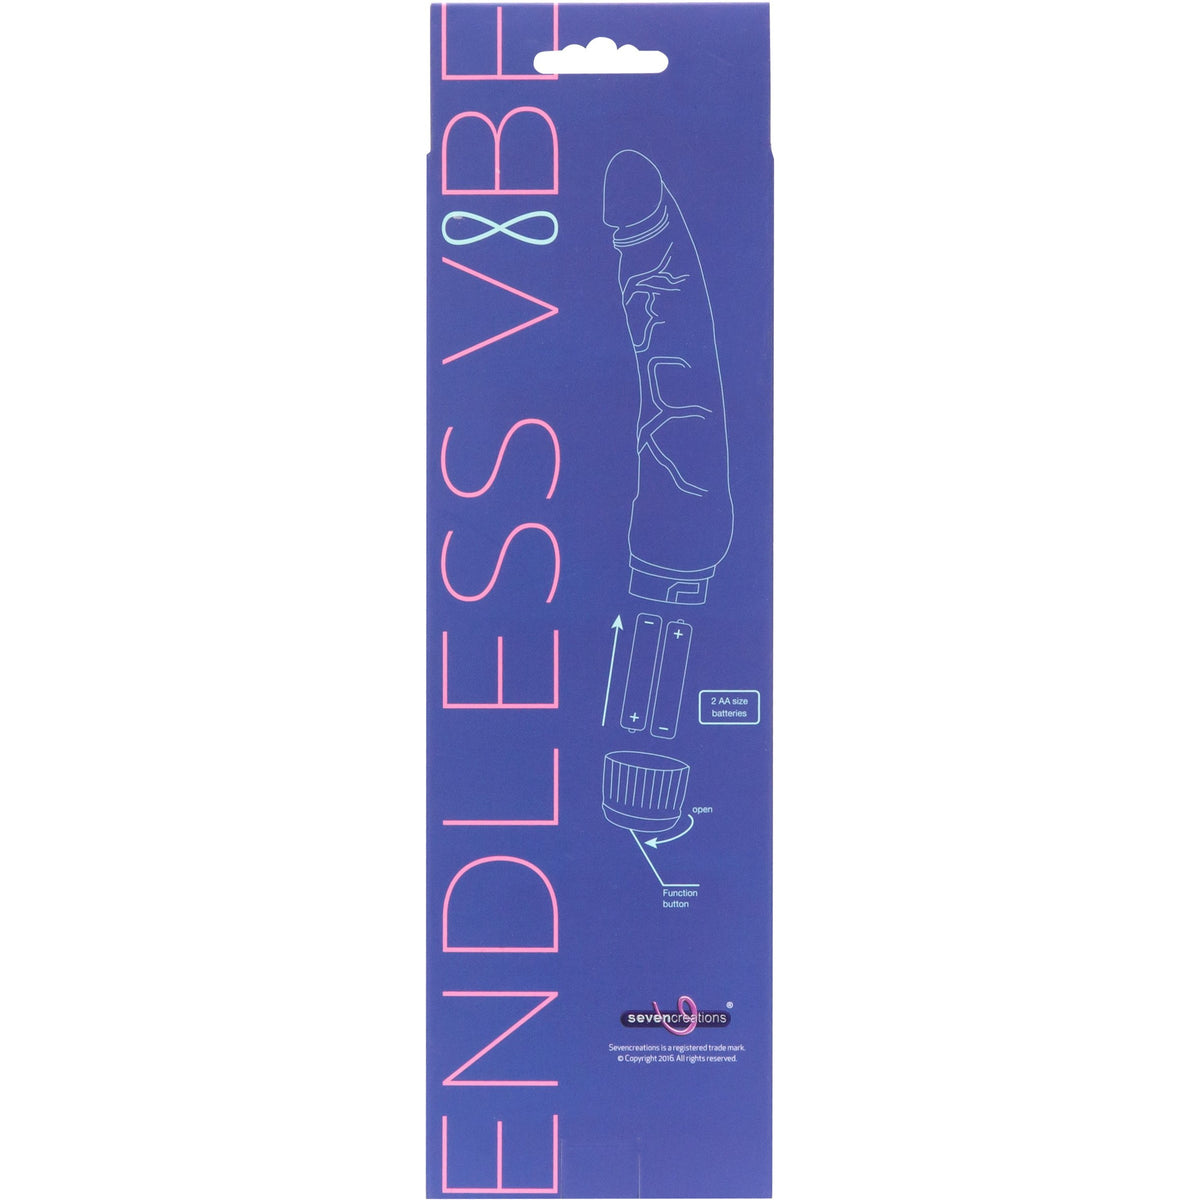 Seven Creations Endless Vibe 100 Function Waterproof Silicone Vibrator